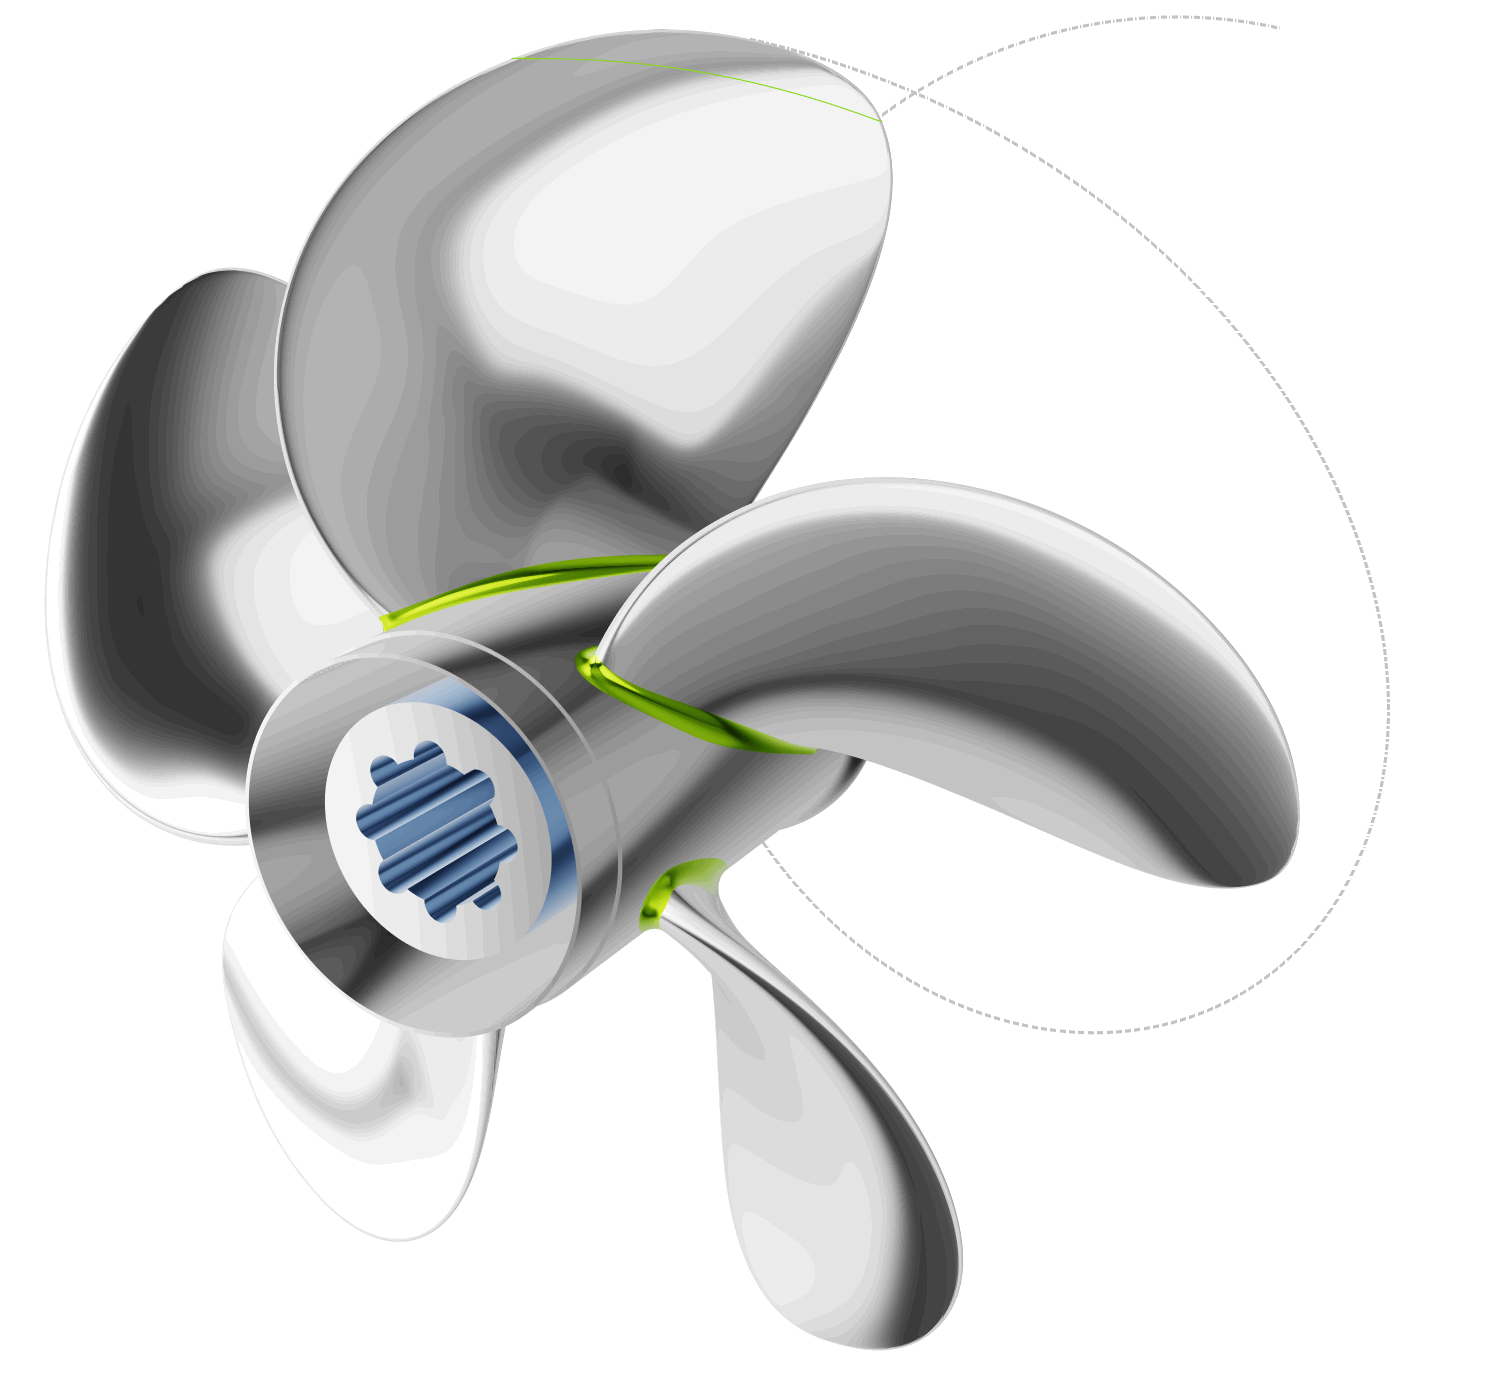 Propeller design morphing of imported geometry.